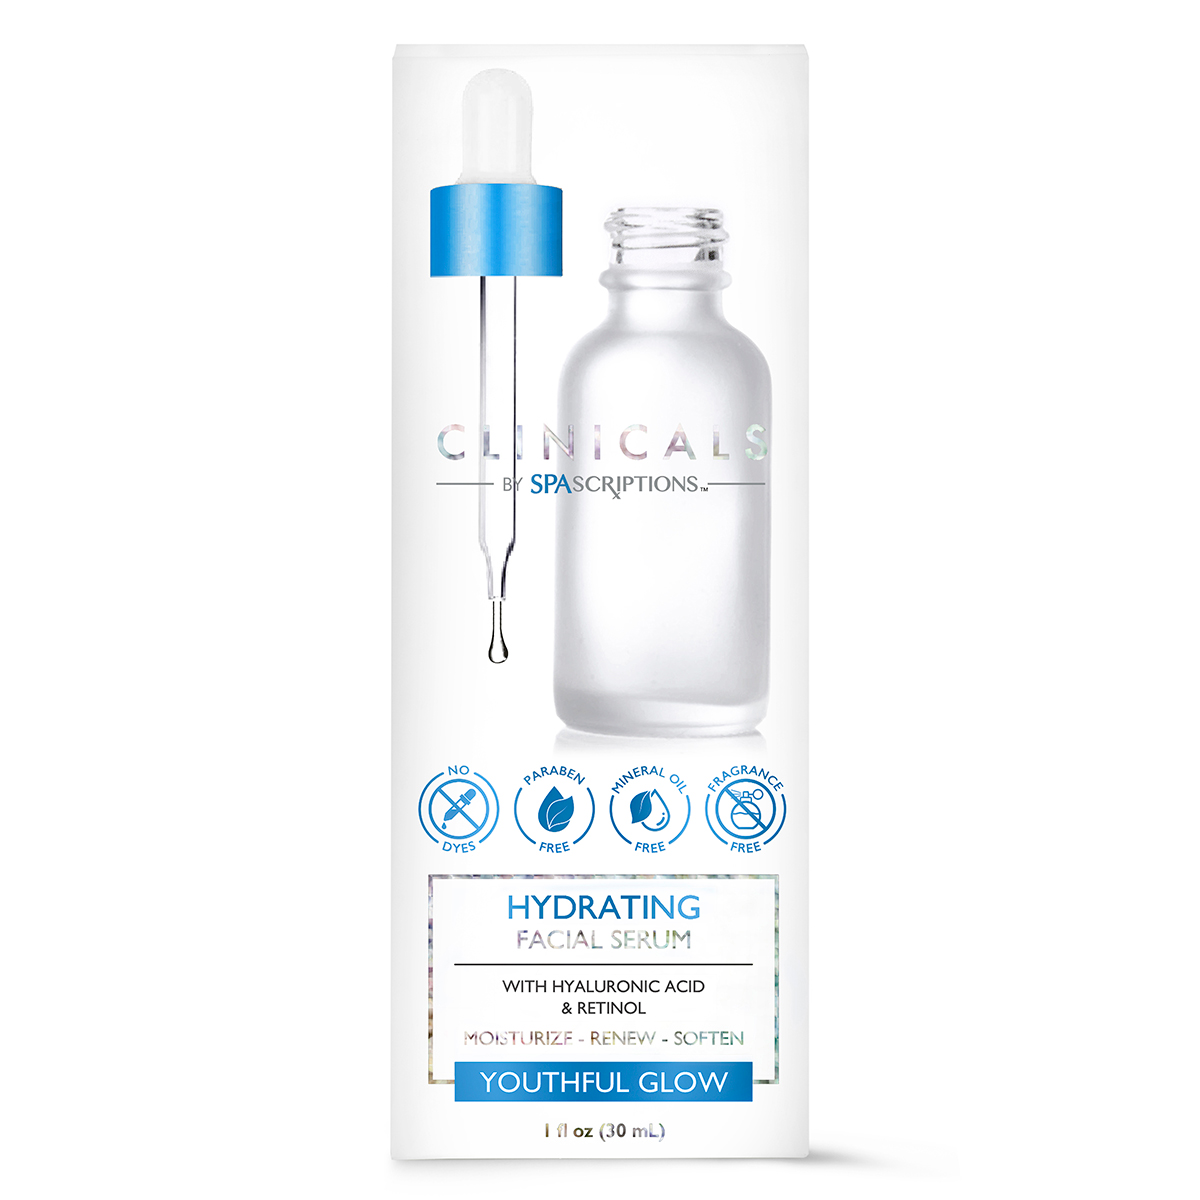 Clinicals By Spascriptions Hydrating Facial Serum